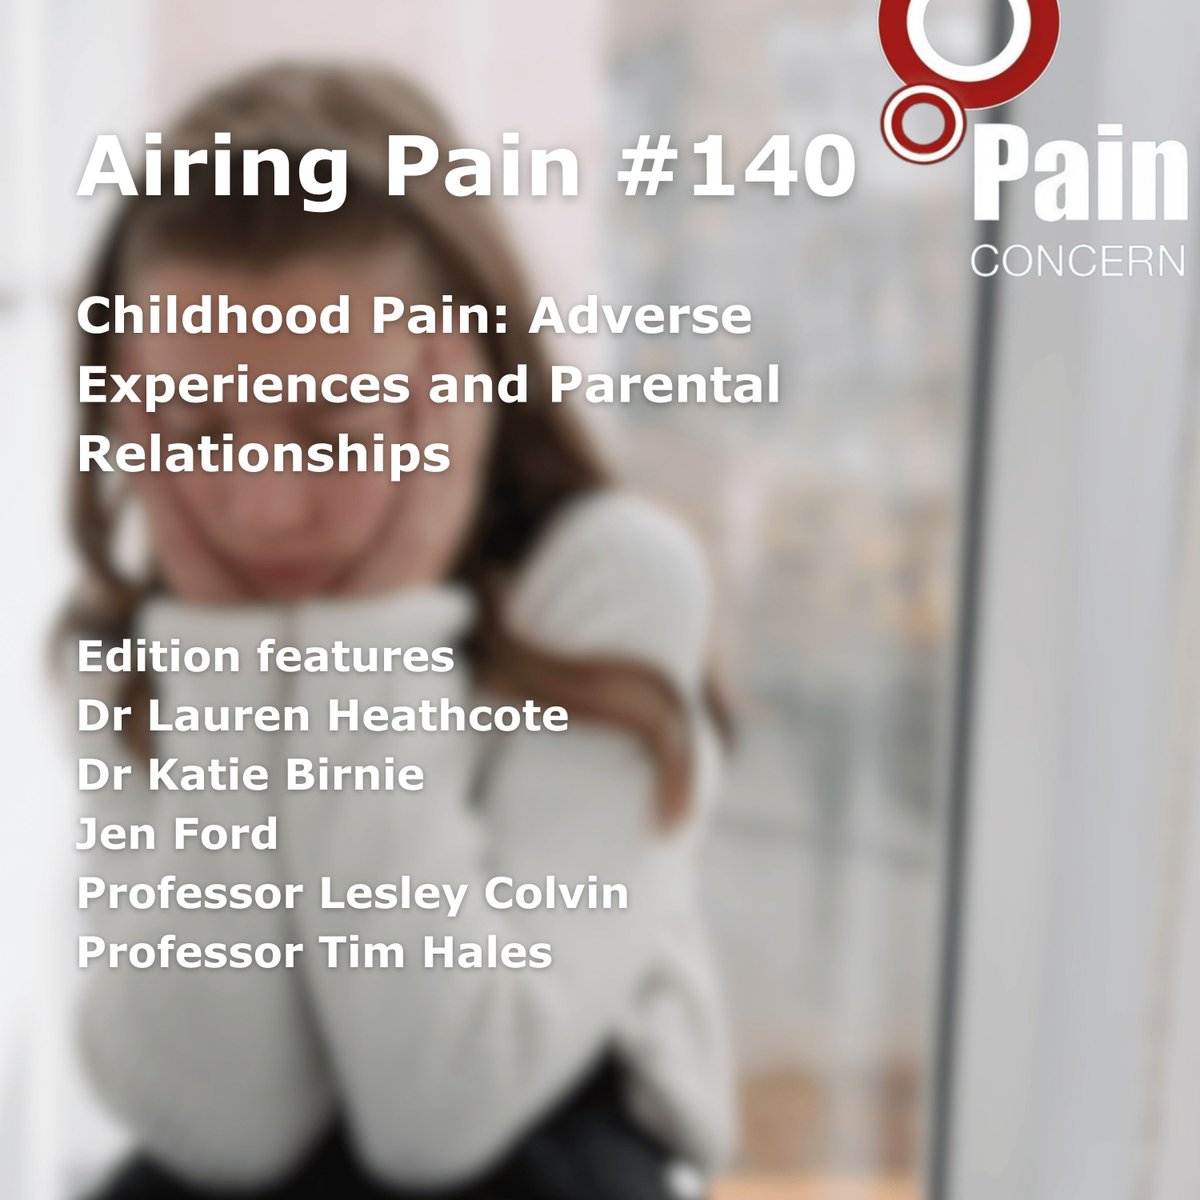 It's here! Listen to Airing Pain 140: Childhood Pain - Adverse Experiences and Parental Relationships now: buff.ly/47bKojb This edition of Airing Pain is about how early childhood experiences can predispose young people to pain alongside other health conditions.